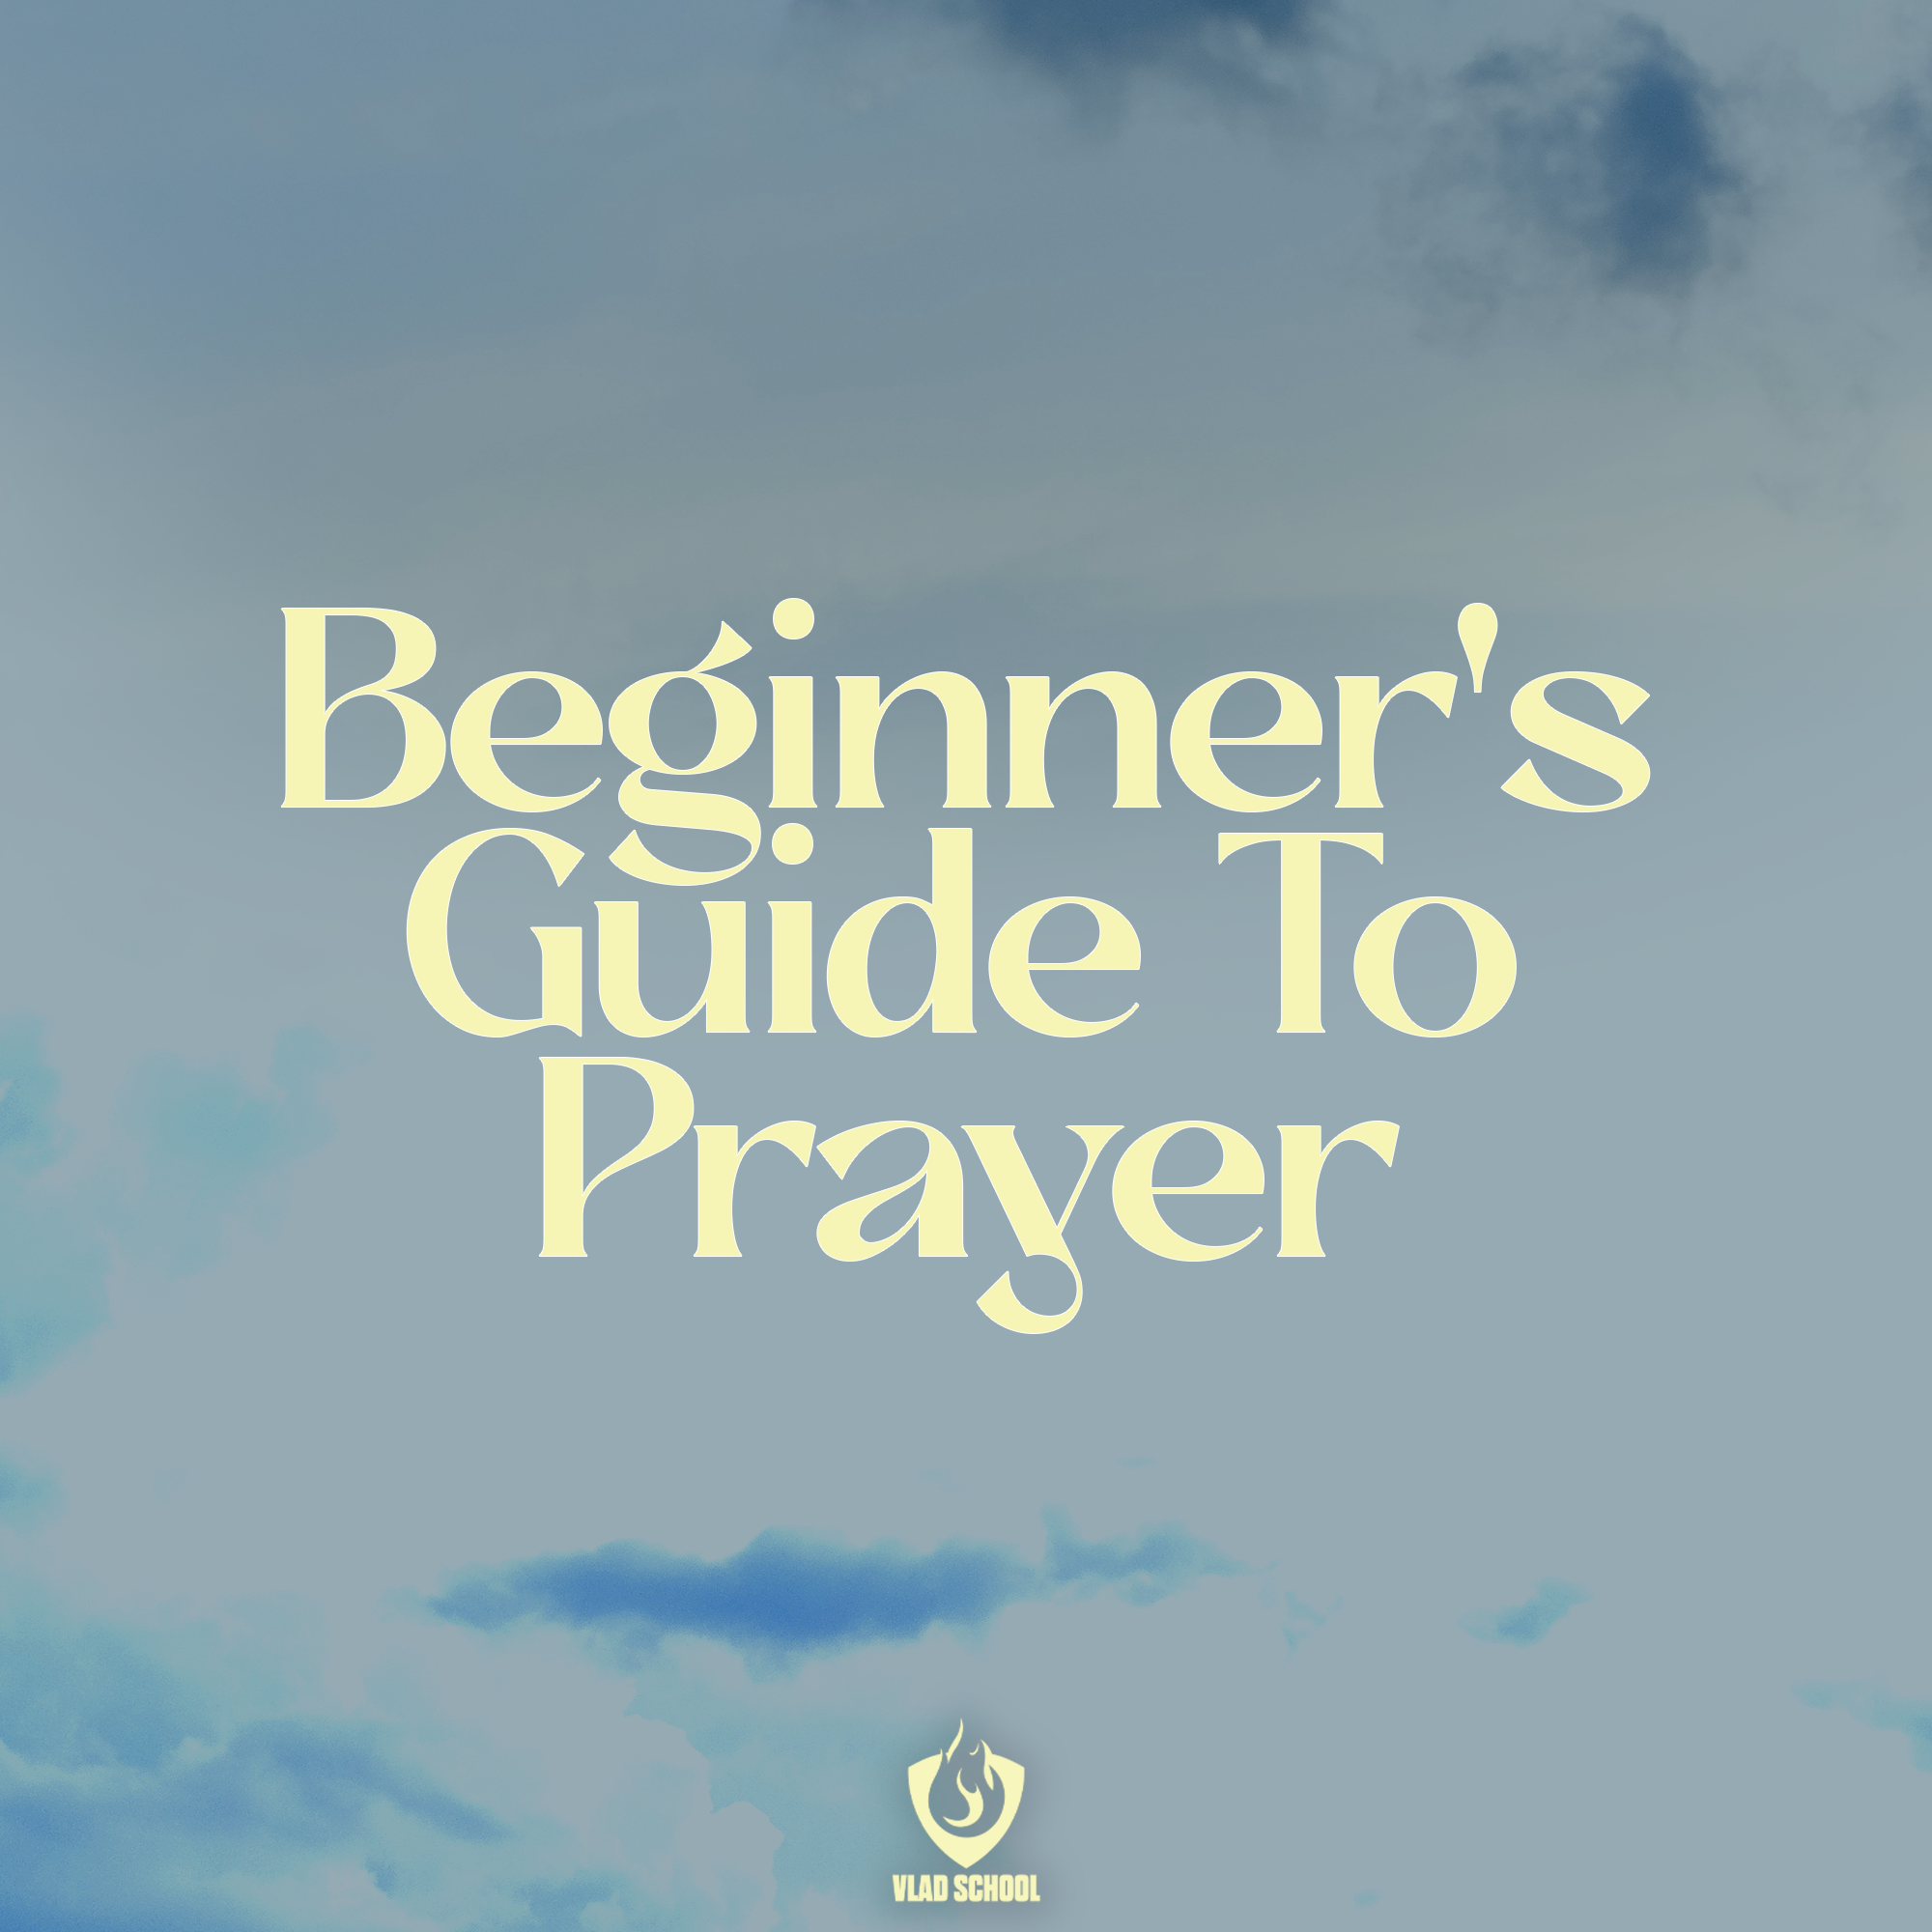 Featured Image for “Beginner’s Guide to Prayer”